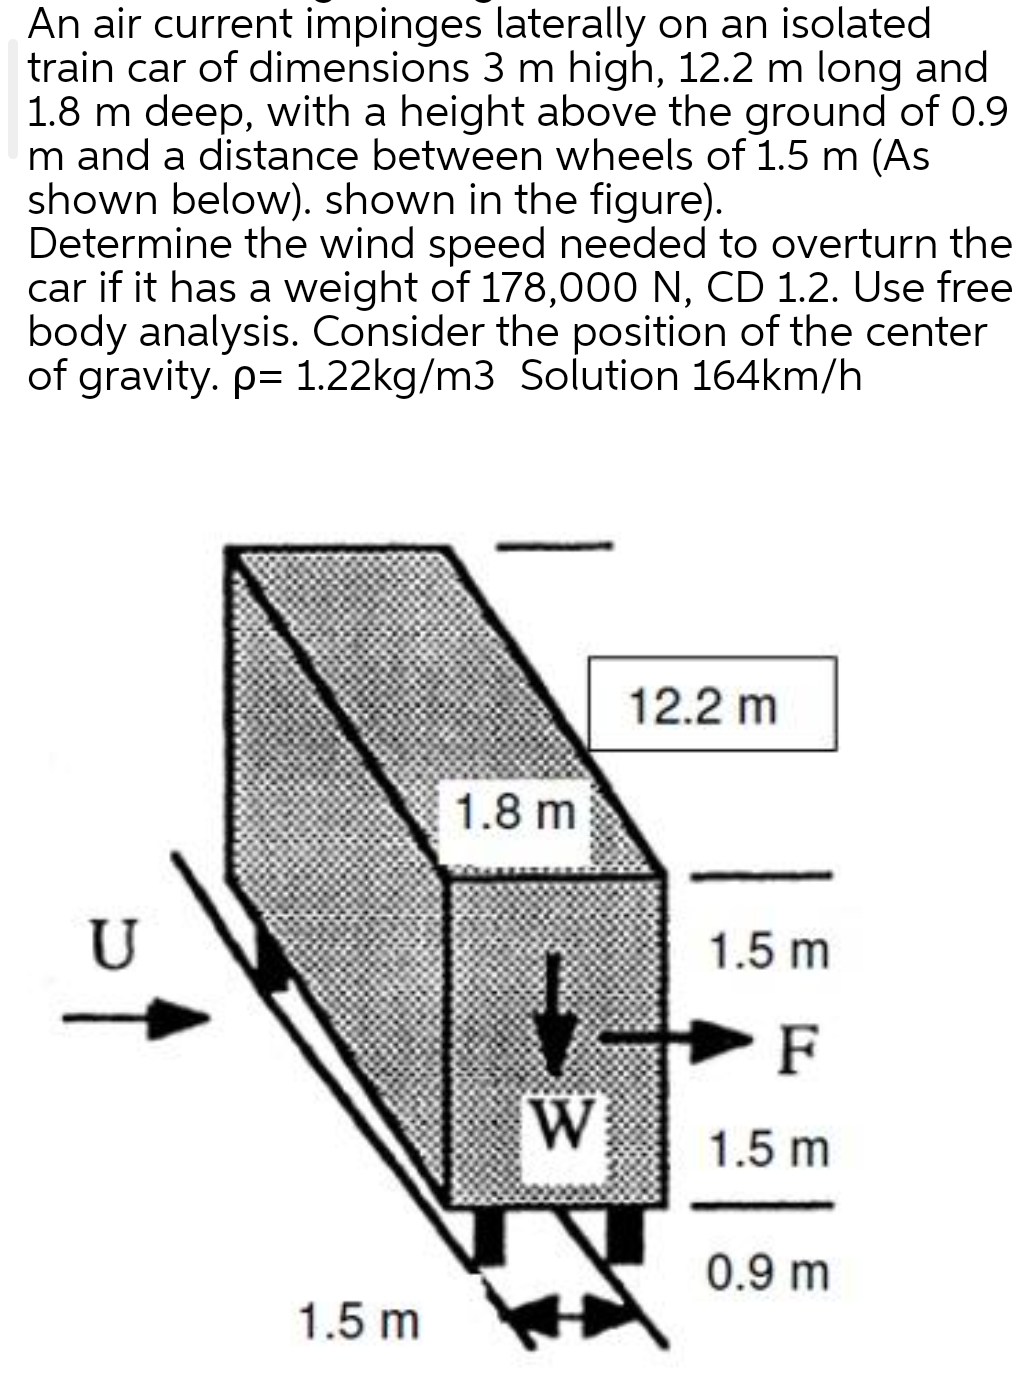 An air current impinges laterally on an isolated
train car of dimensions 3 m high, 12.2 m long and
1.8 m deep, with a height above the ground of 0.9
m and a distance between wheels of 1.5 m (As
shown below). shown in the figure).
Determine the wind speed needed to overturn the
car if it has a weight of 178,000 N, CD 1.2. Use free
body analysis. Consider the position of the center
of gravity. p= 1.22kg/m3 Solution 164km/h
U
1.5 m
1.8 m
W
12.2 m
1.5 m
F
1.5 m
0.9 m